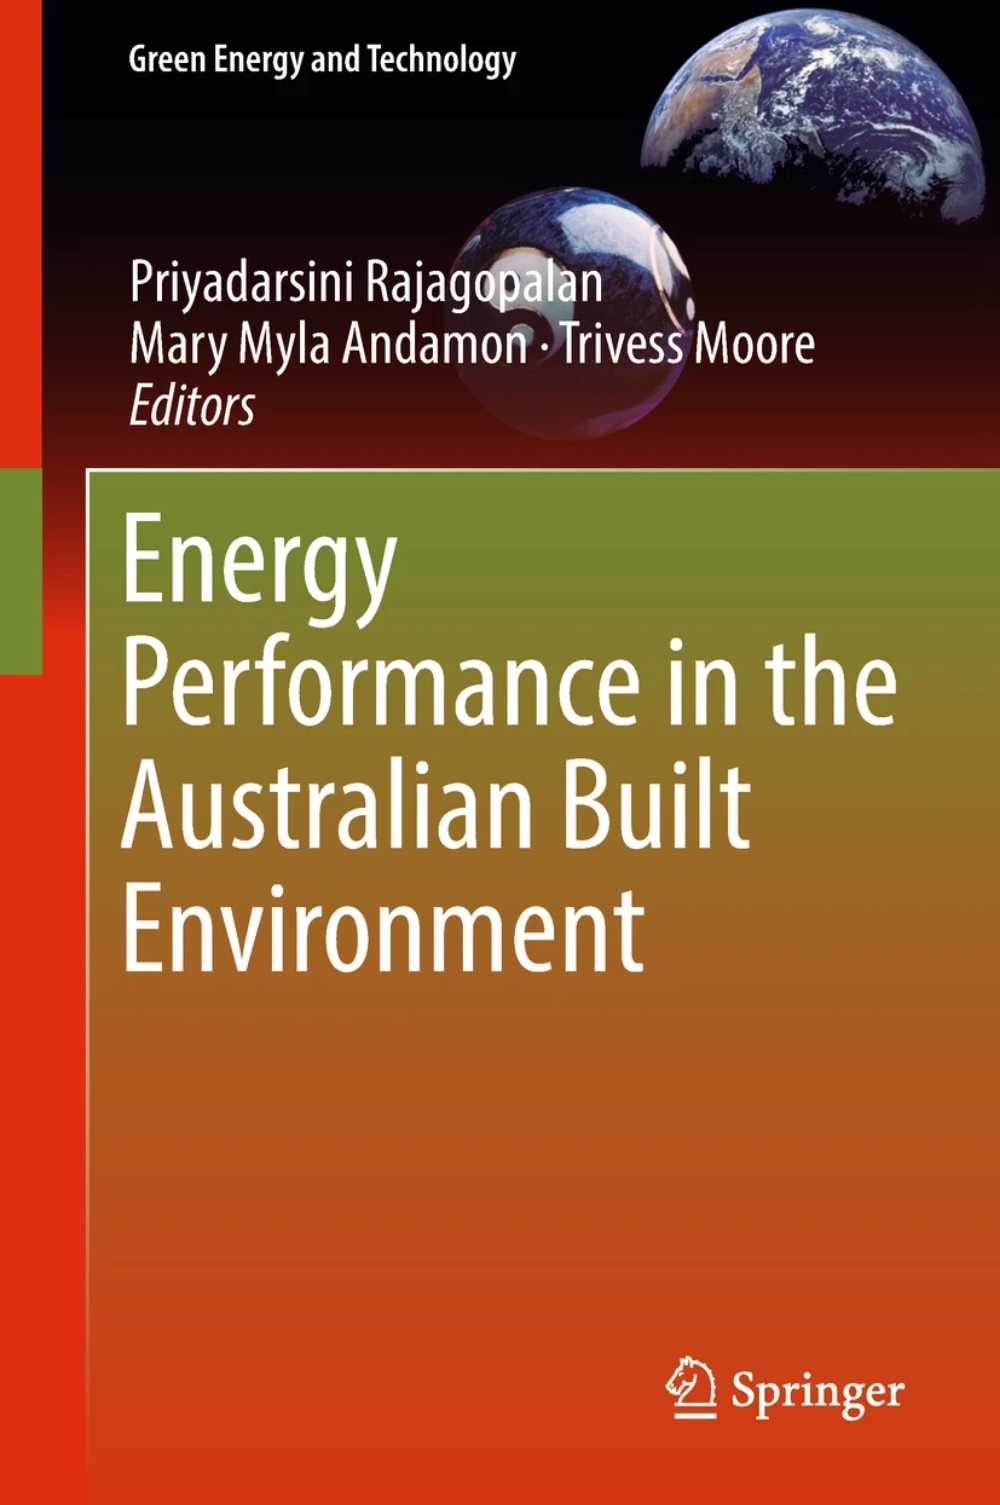 Energy Performance in the Australian Built Environment book cover